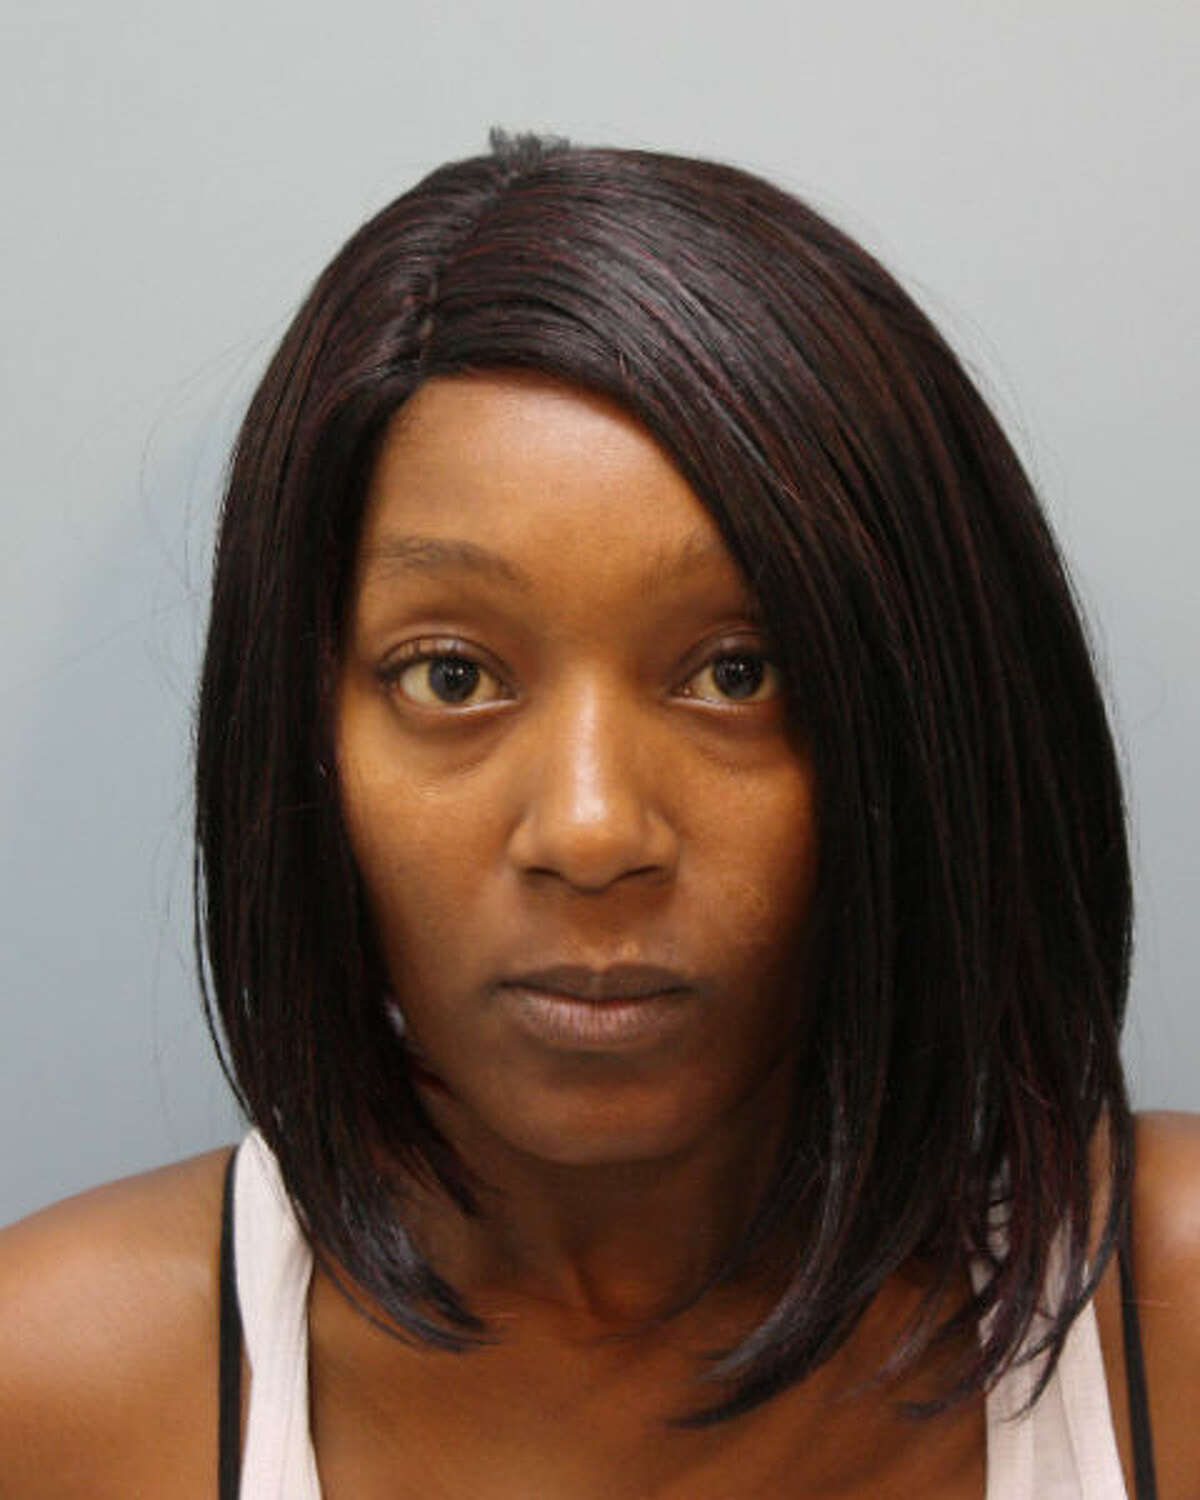 30 Year Old Woman Charged With Murder In Shooting Death Of 65 Year Old Boyfriend 4793